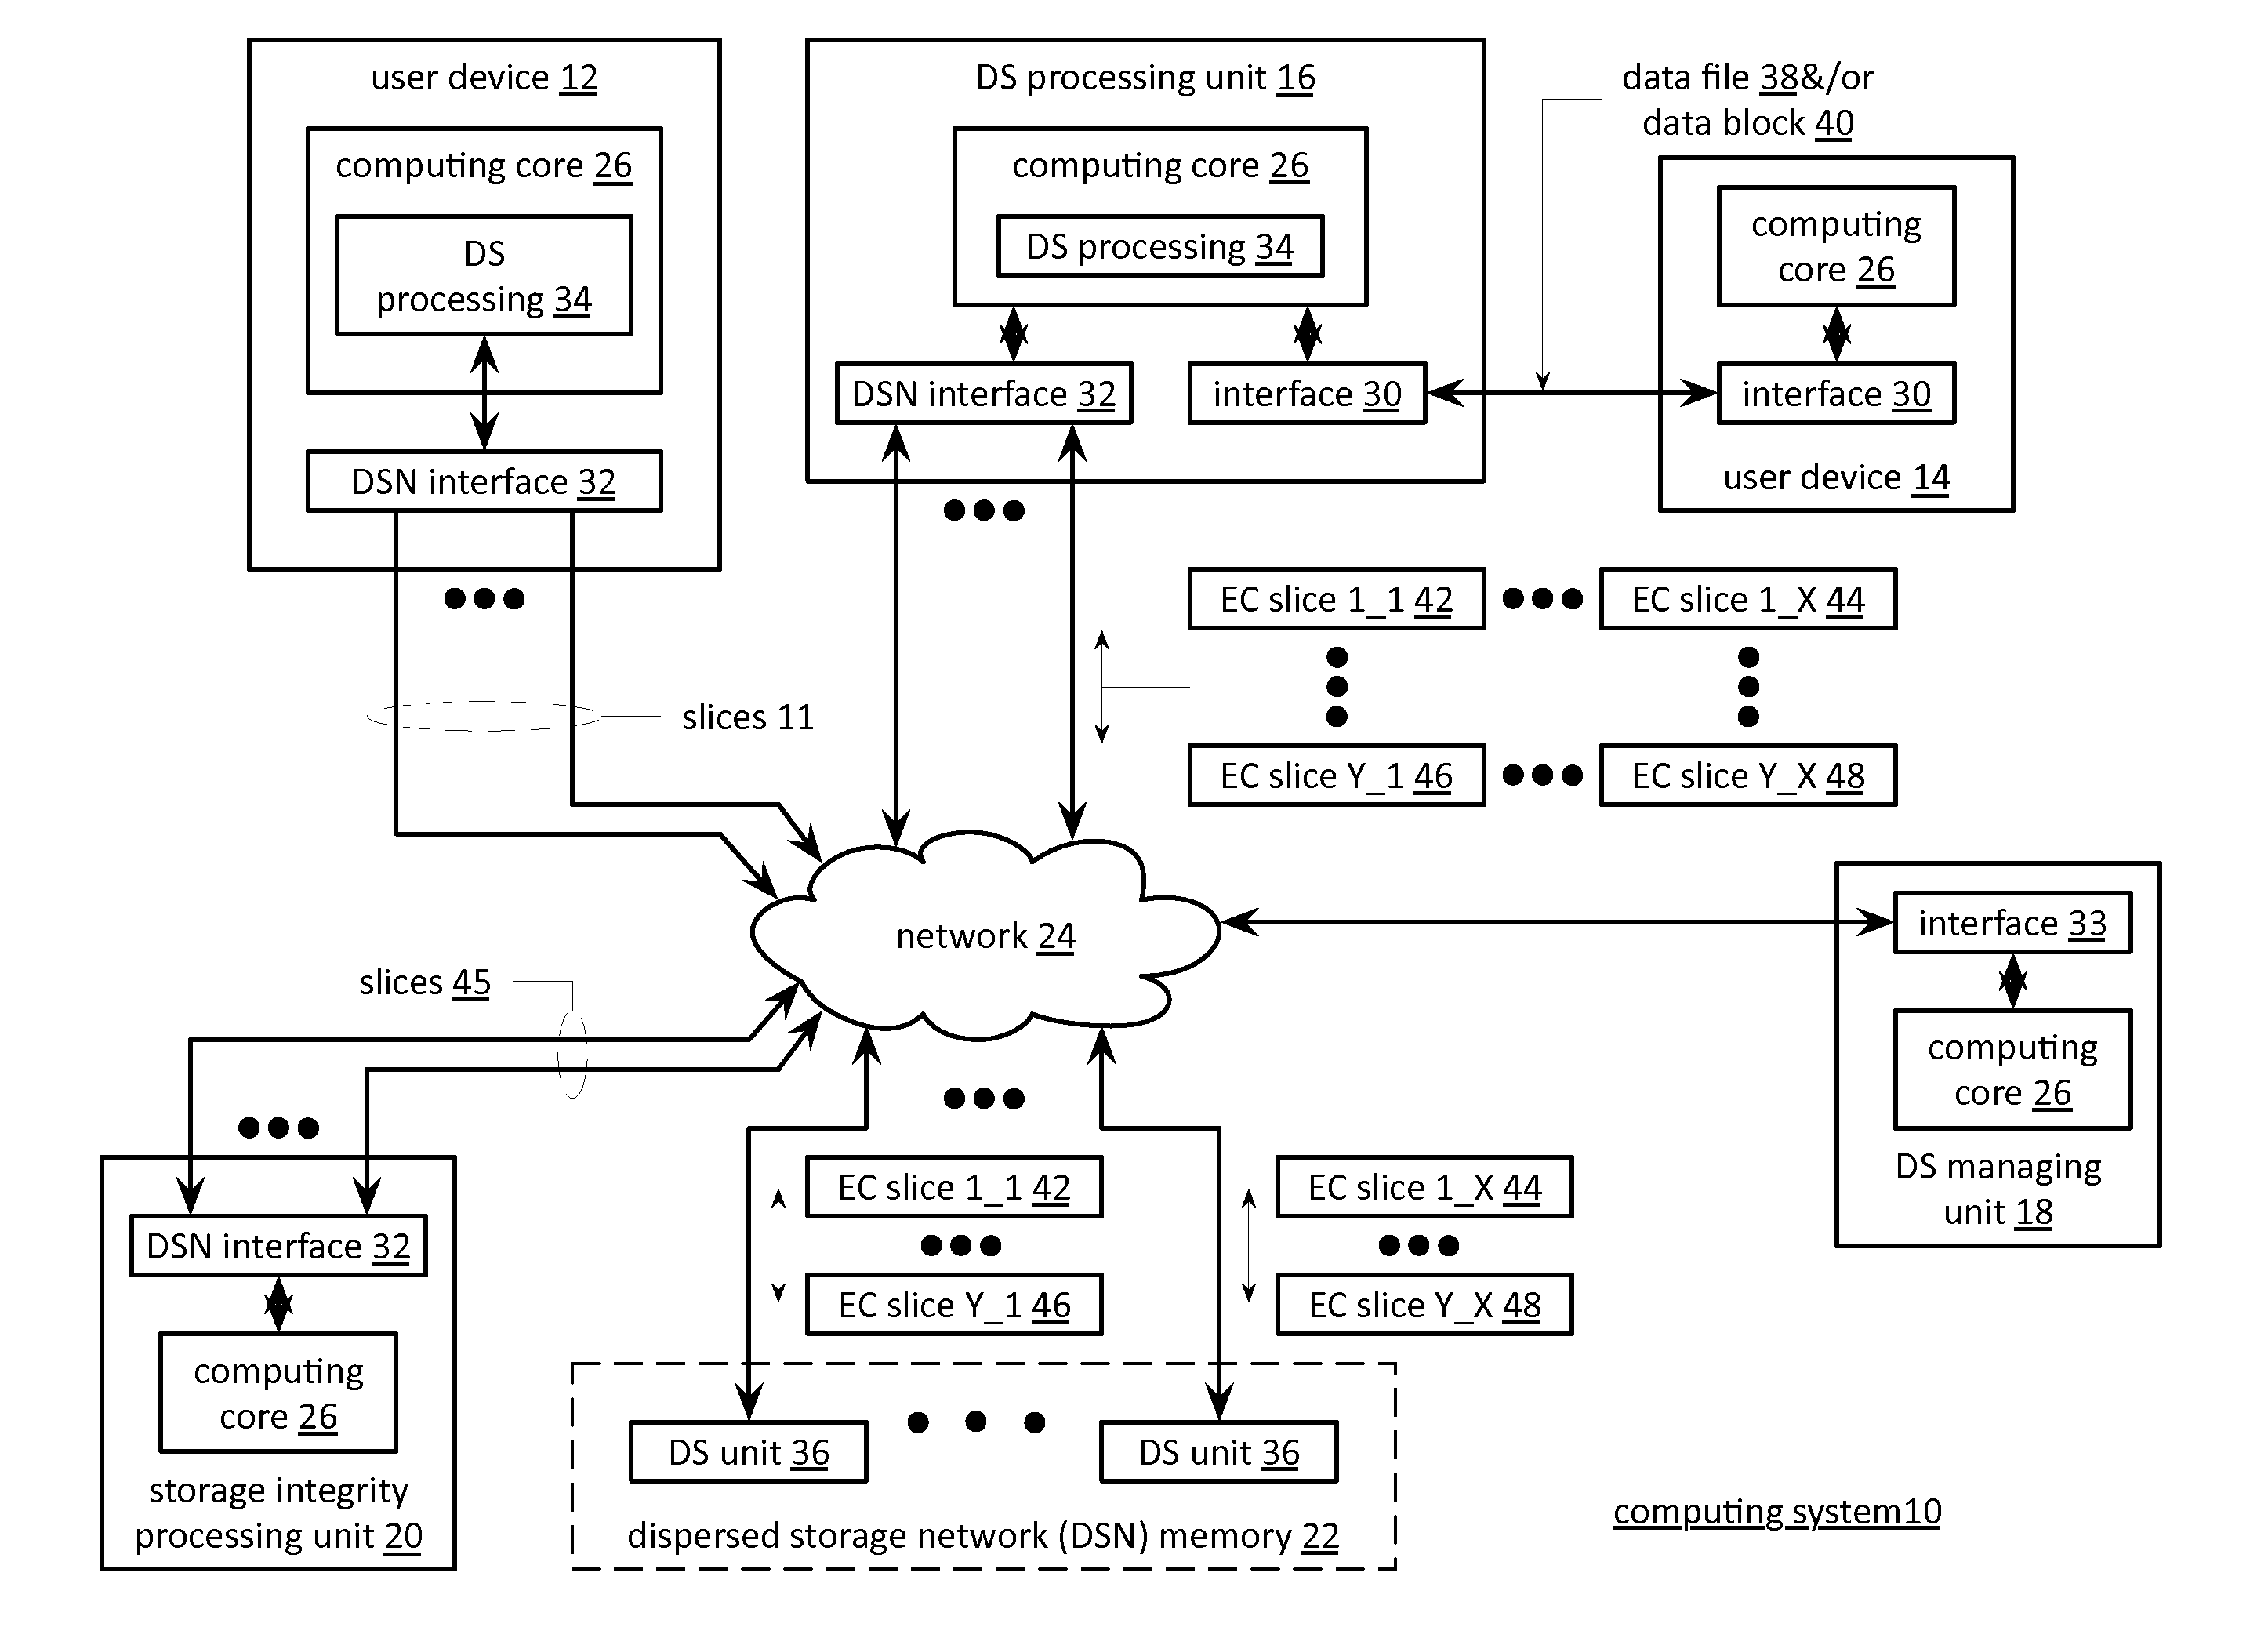 Identifying a slice name information error in a dispersed storage network